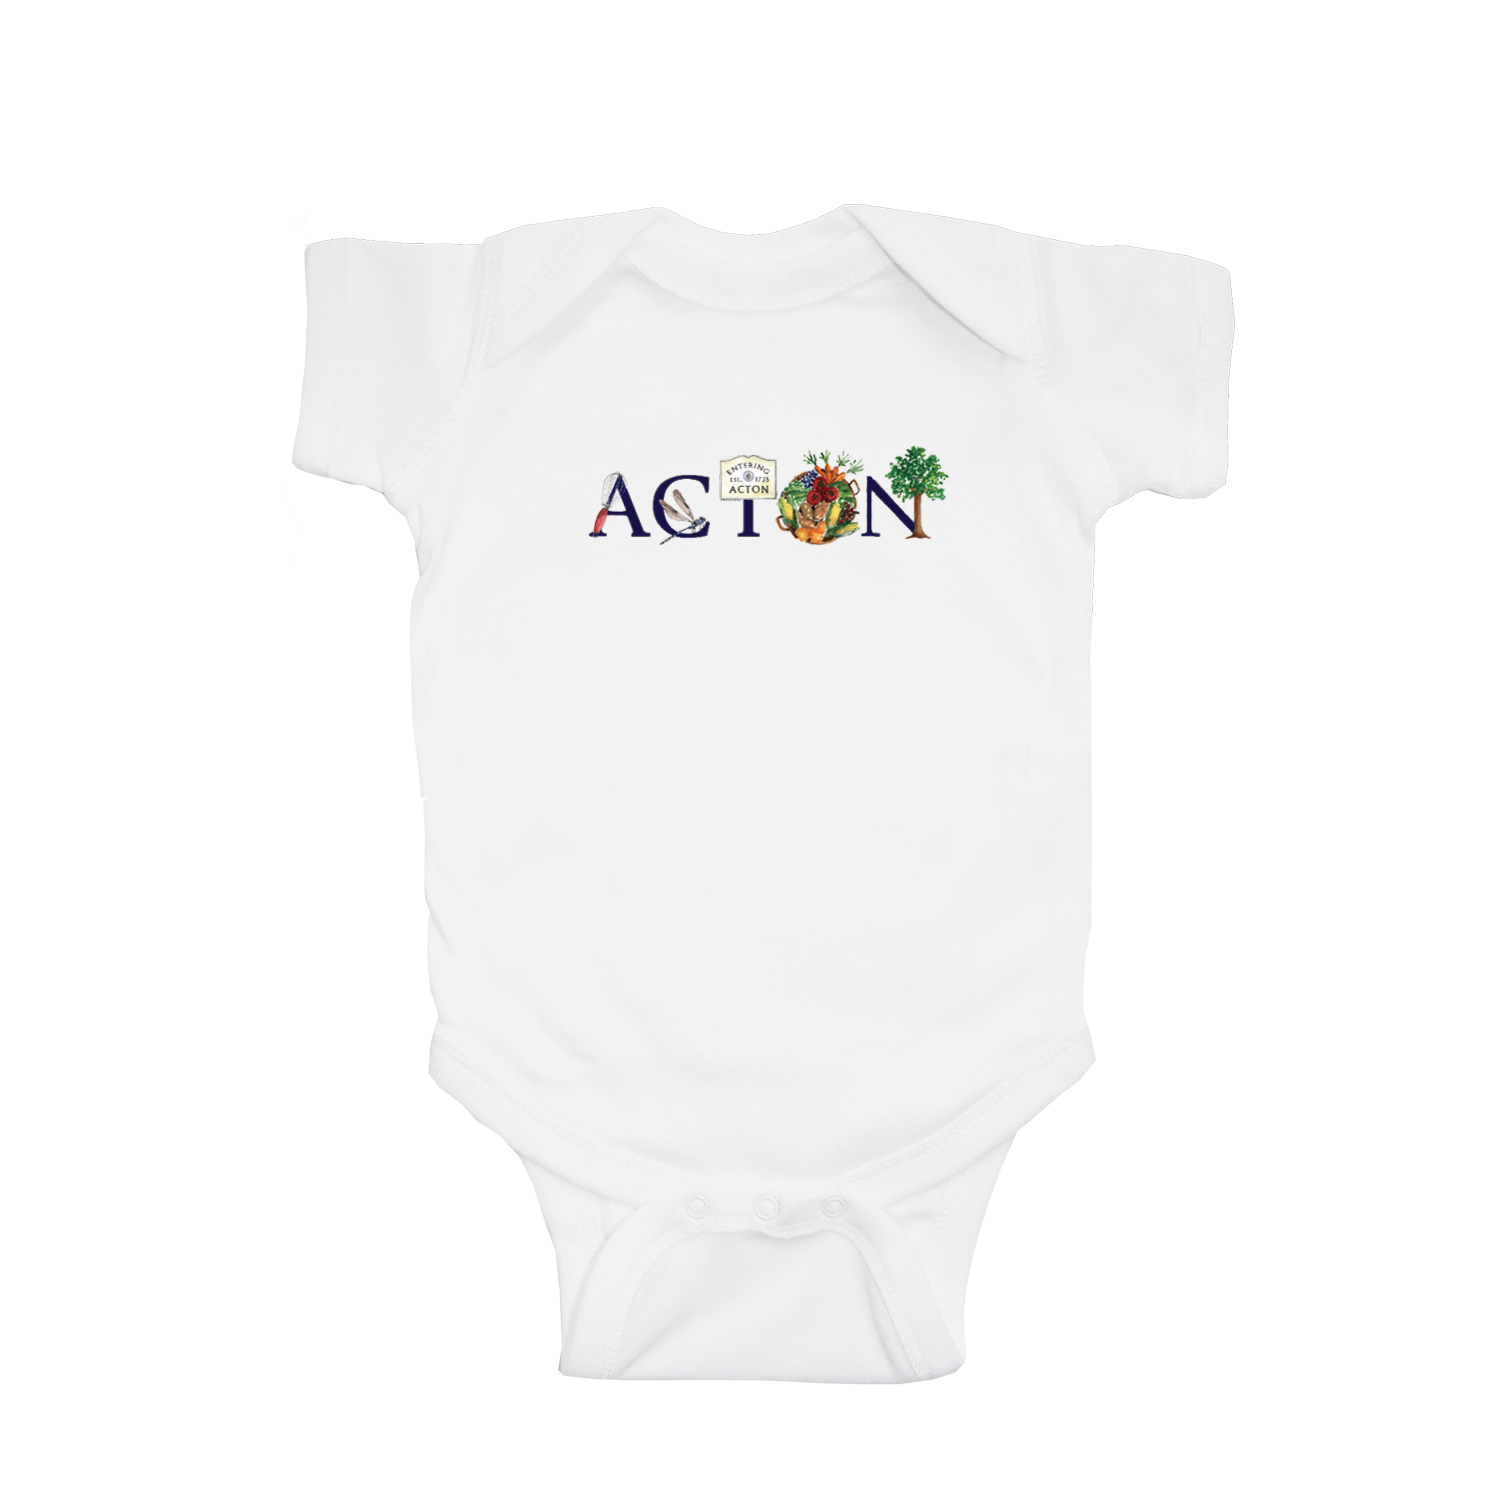 acton baby snap up short sleeve